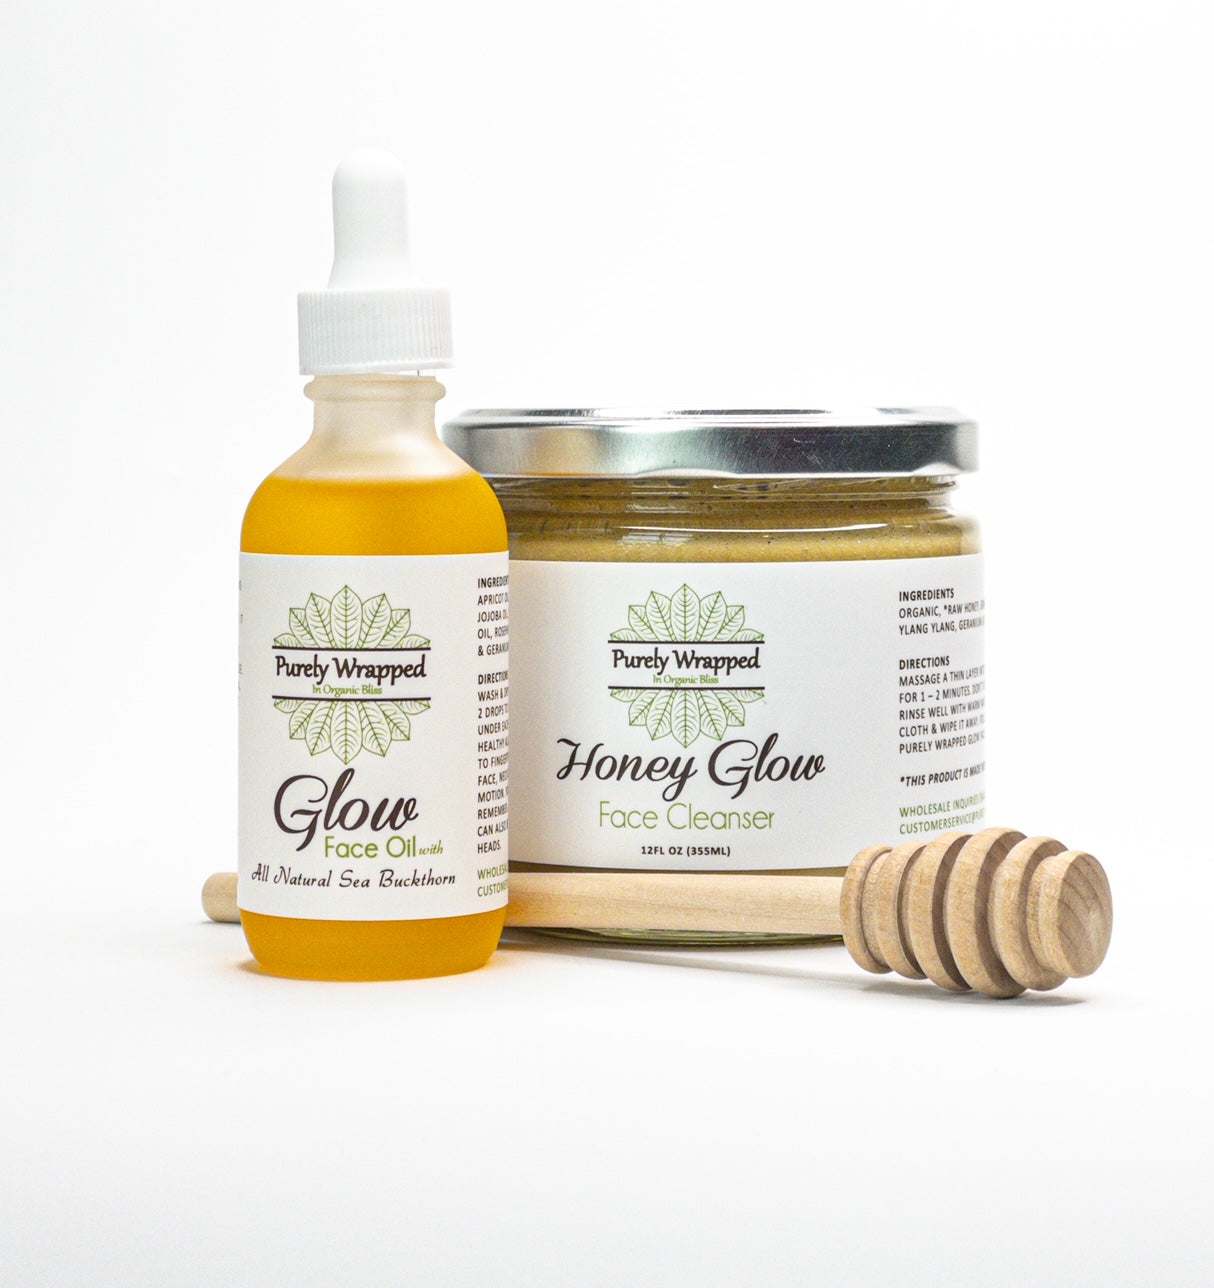 Honey Glow Face Cleanser